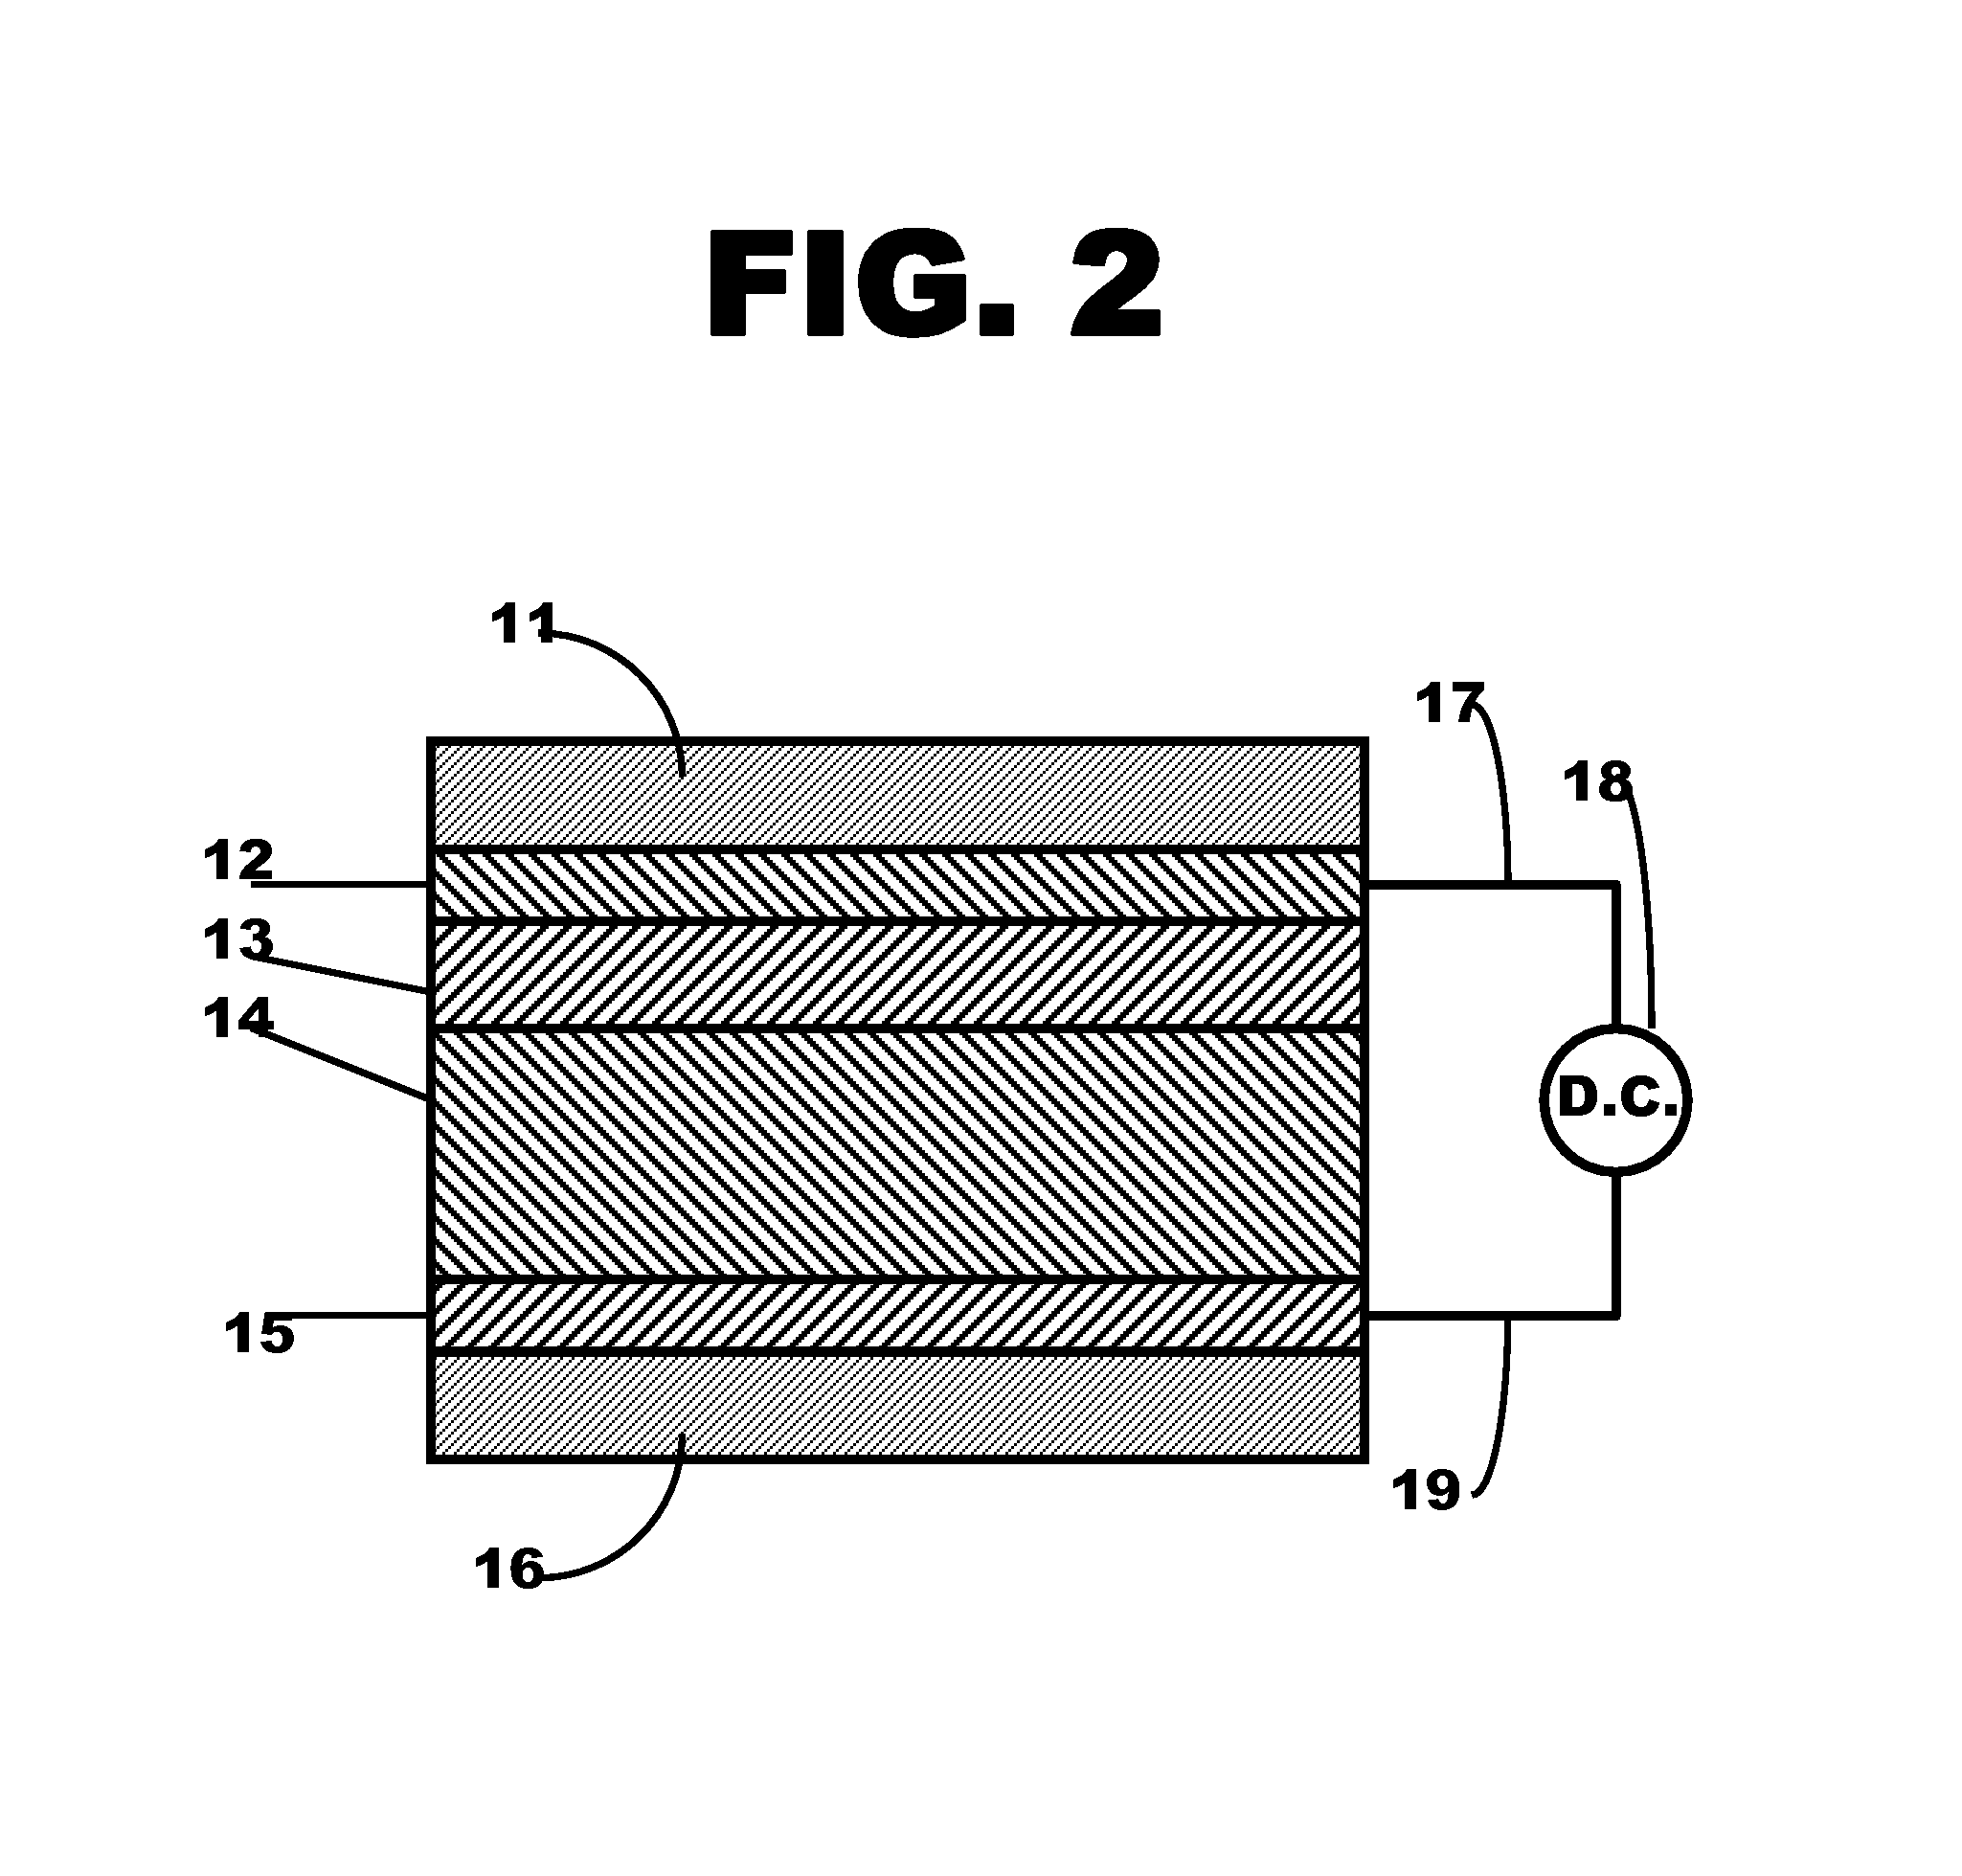 Metal ferrocyanide-polymer composite layer within a flexible electrochromic device